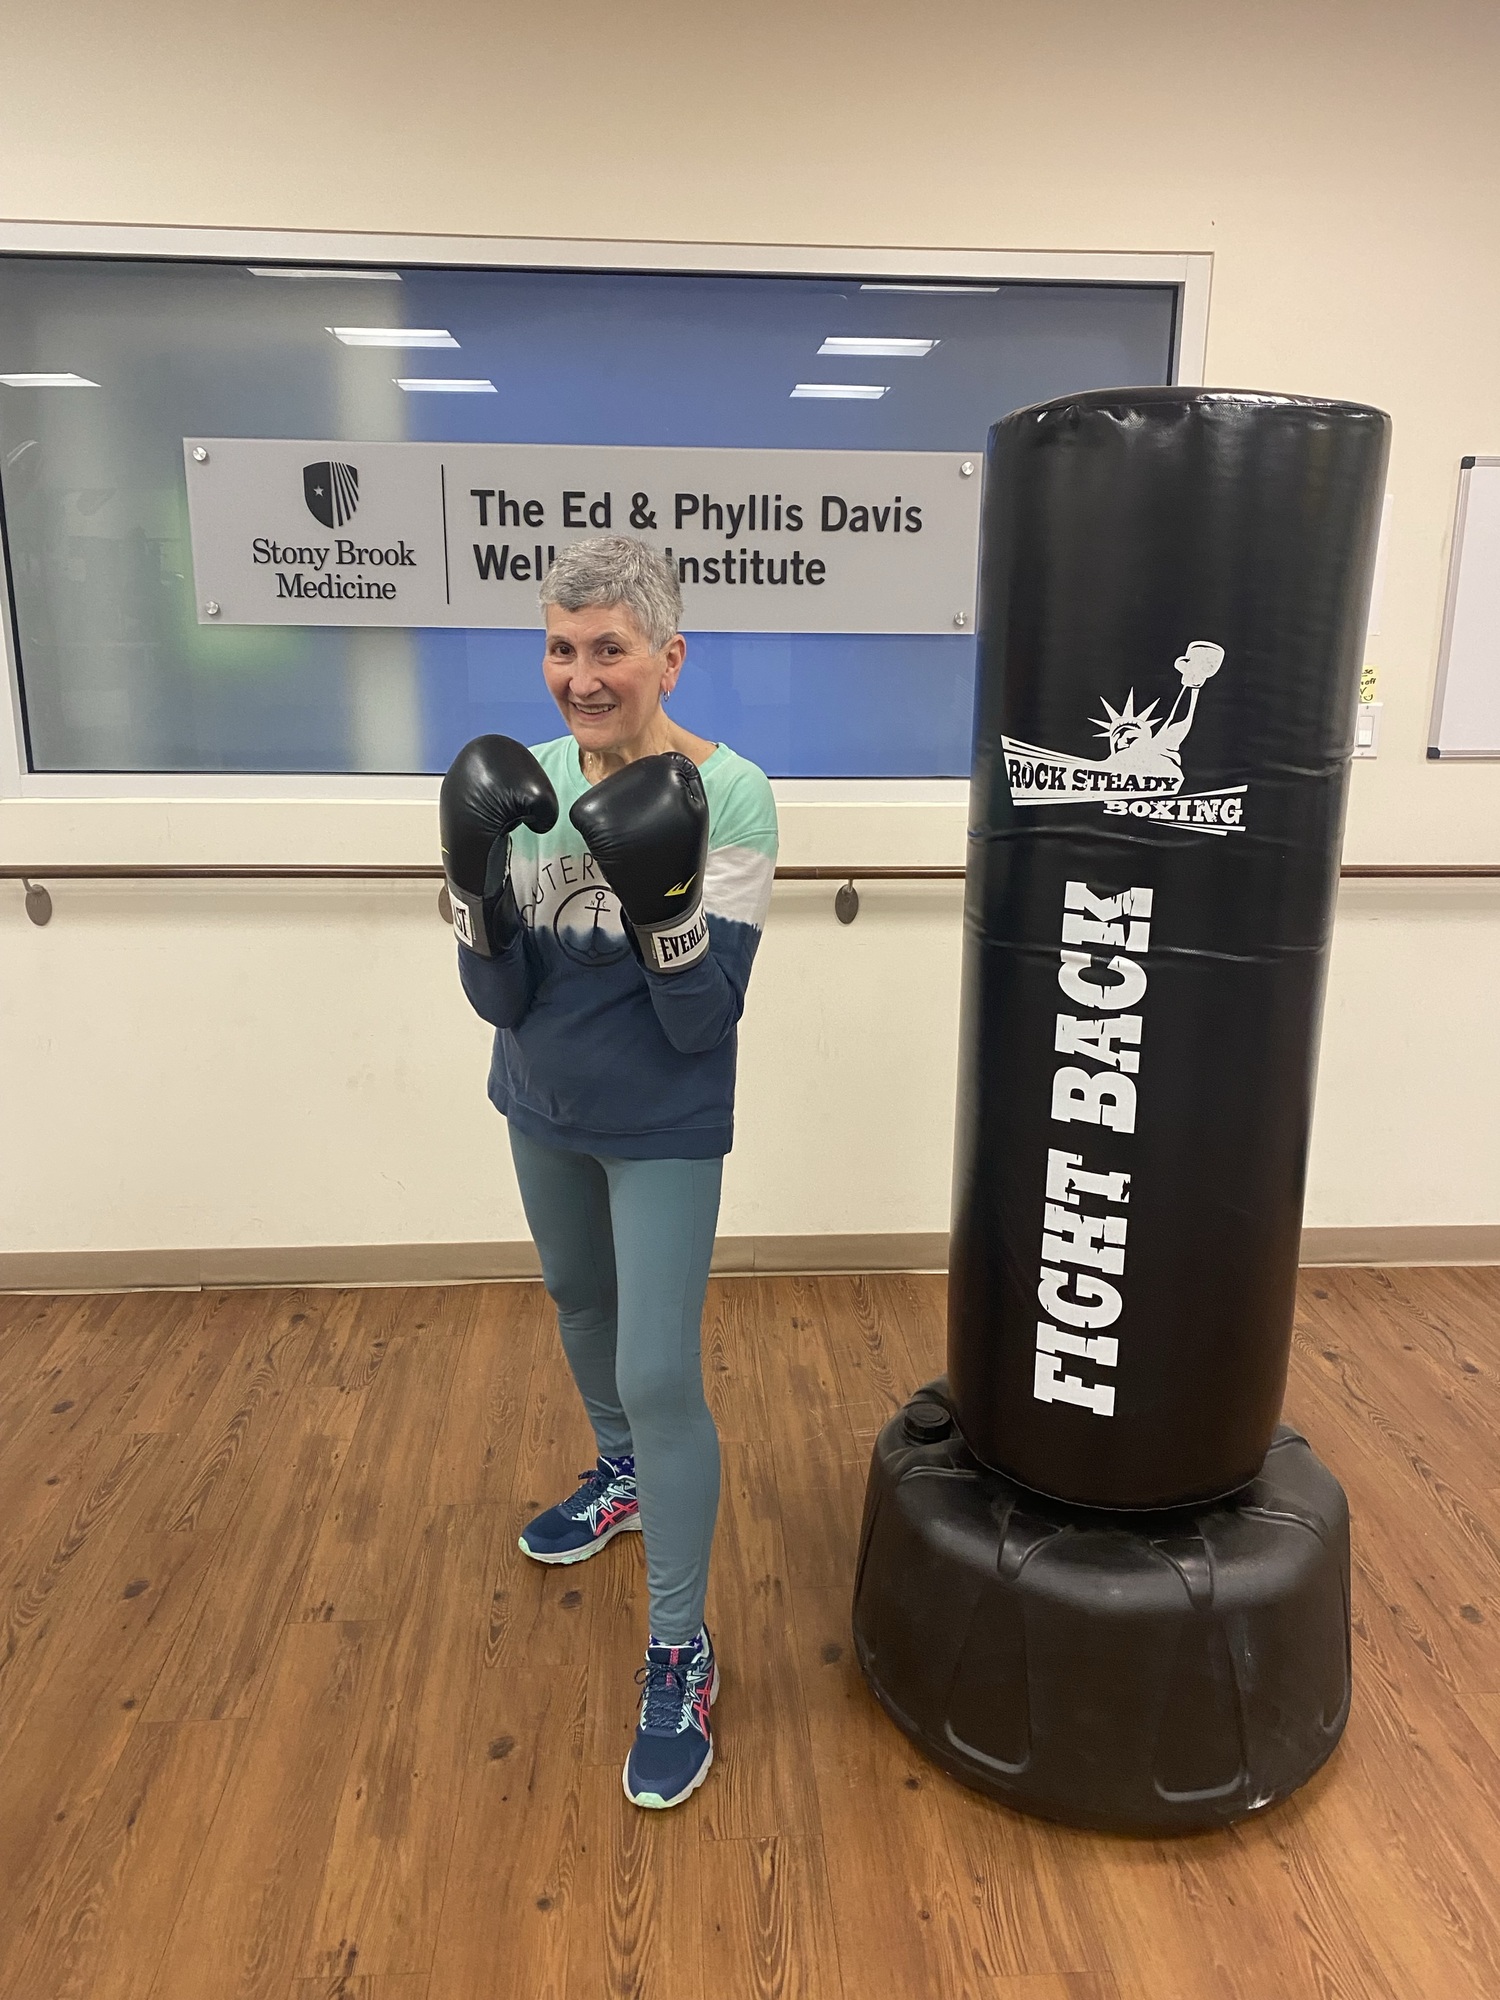 Janice Cooper, a Rock Steady boxer, attended 191 Parkinson's exercise classes last year, which was the highest of any participant. SETH GREINER